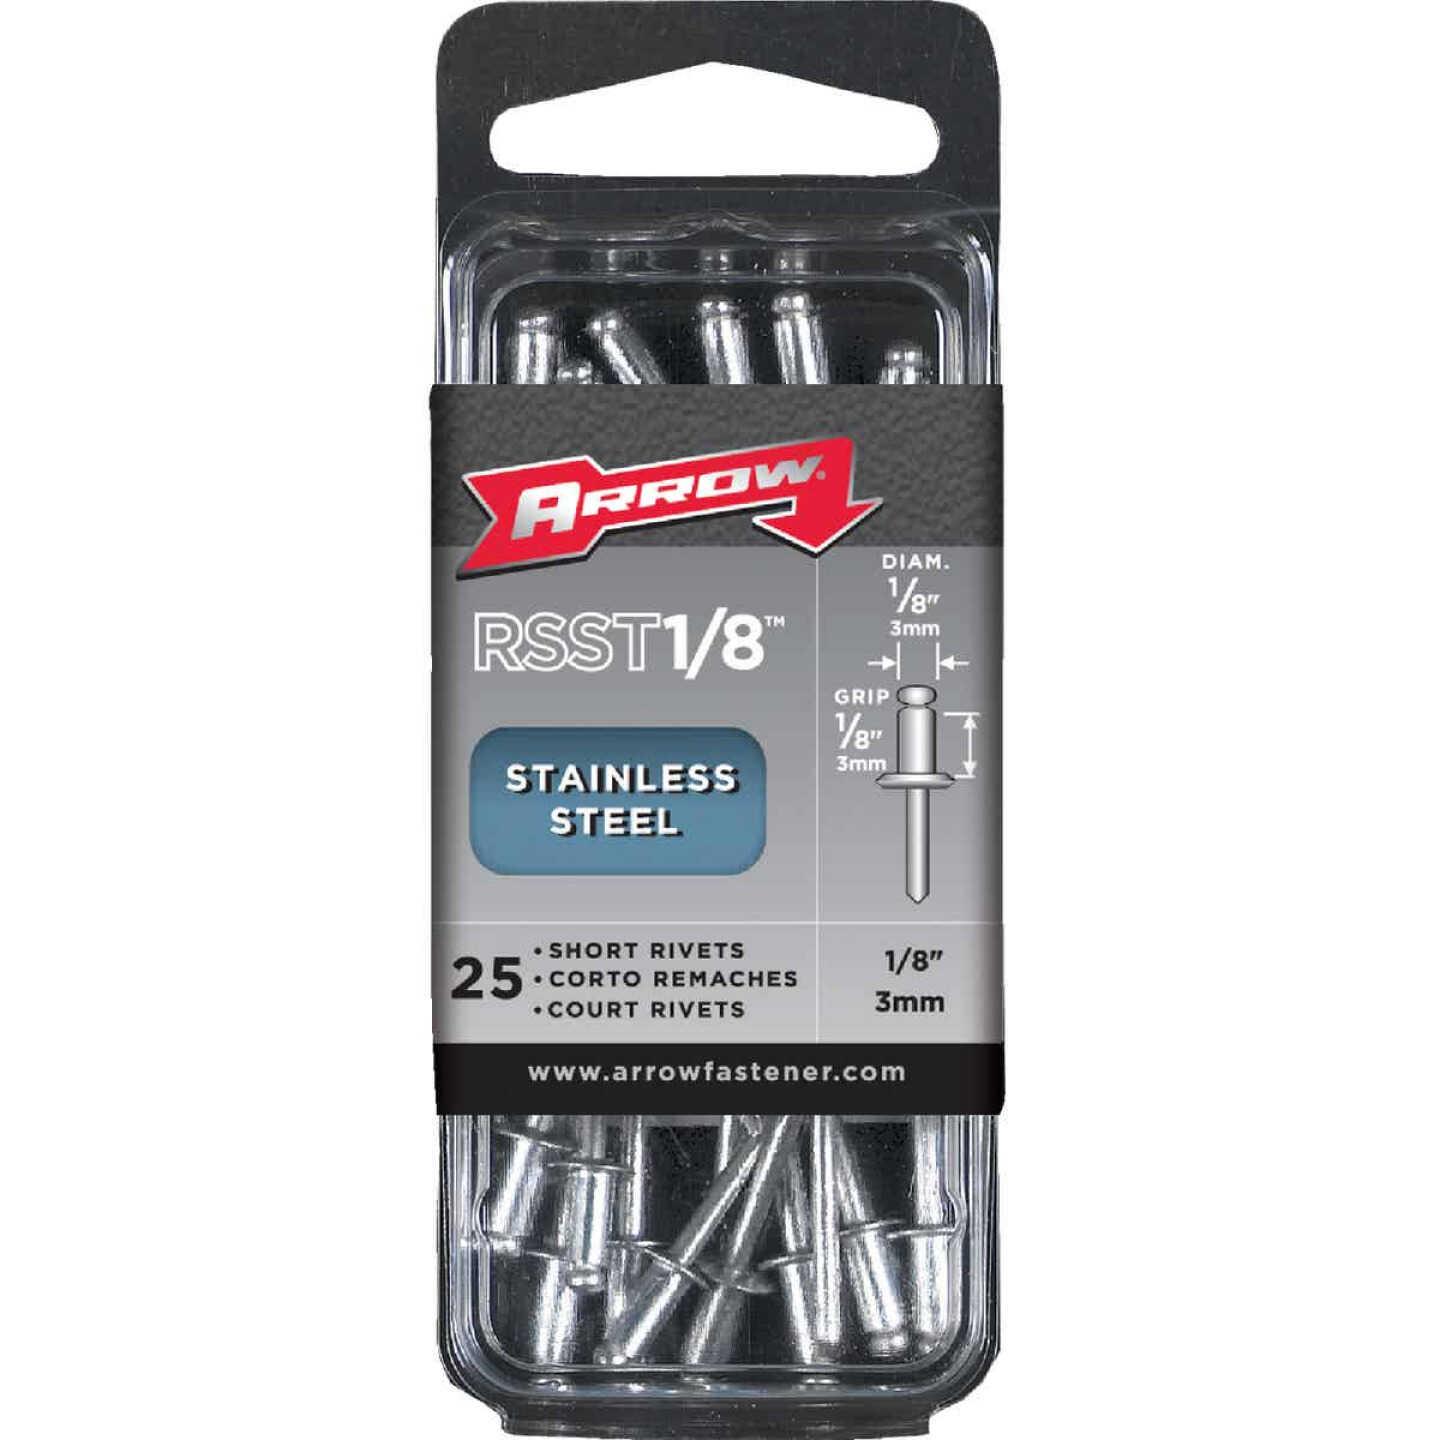 Arrow 3/16 in. x 1/8in. Aluminum Rivets (50-Pack) RSA3/16IP - The Home Depot